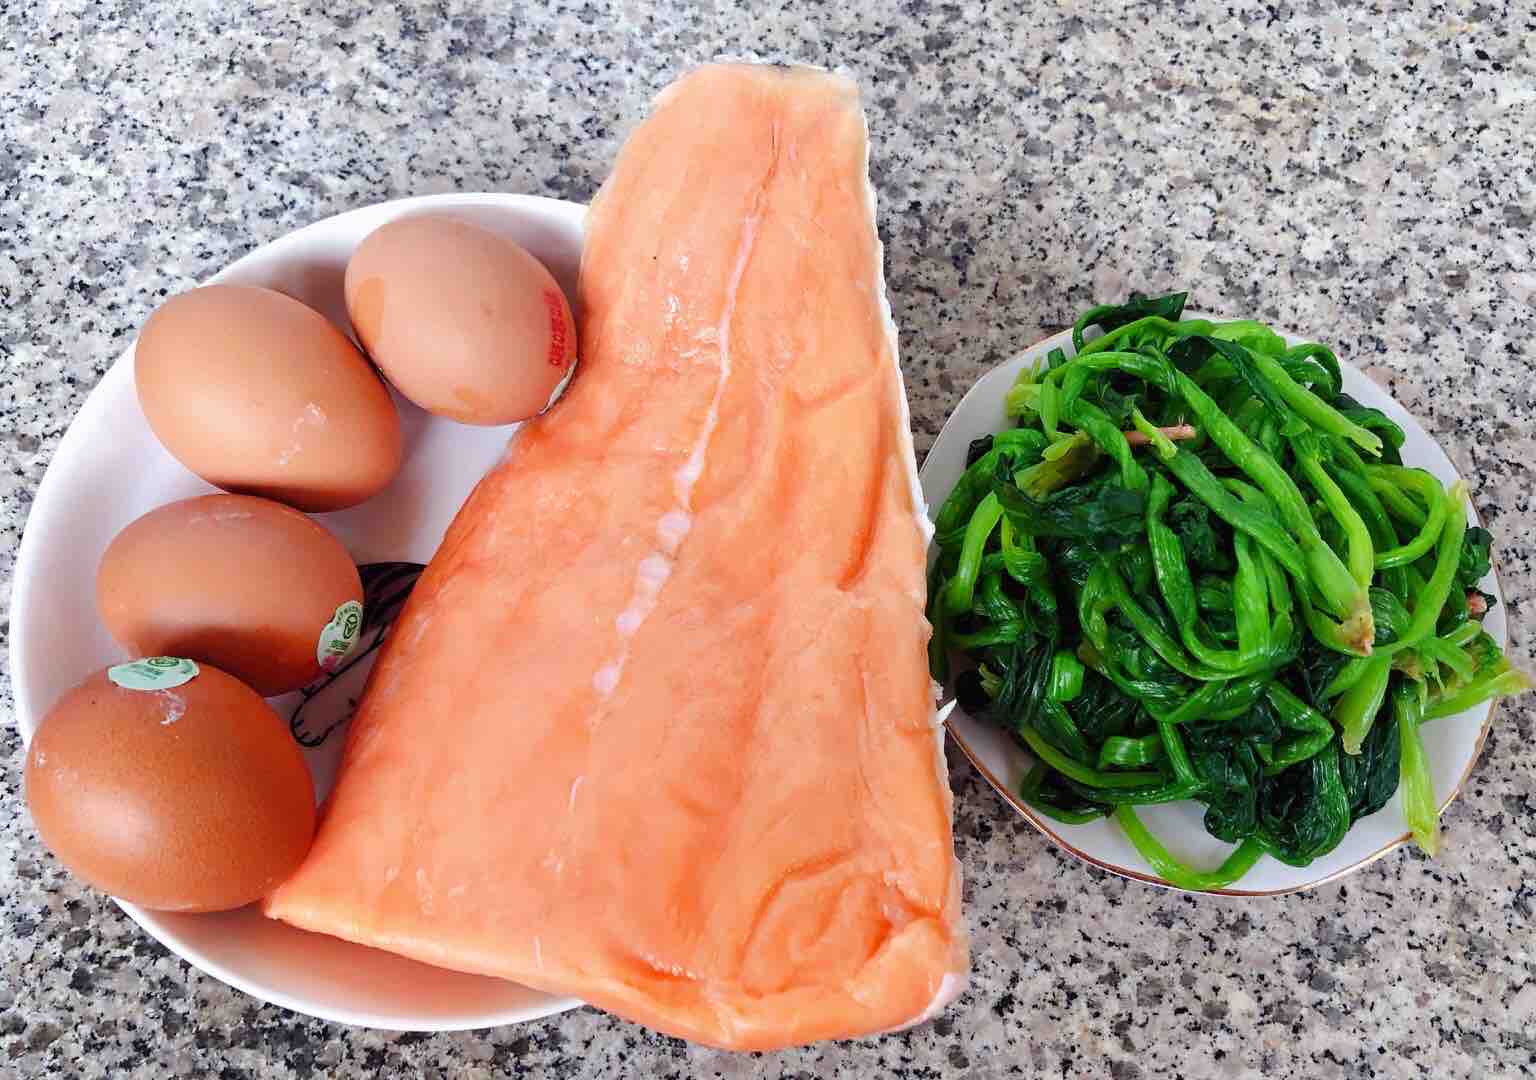 Steamed Custard with Salmon and Spinach recipe